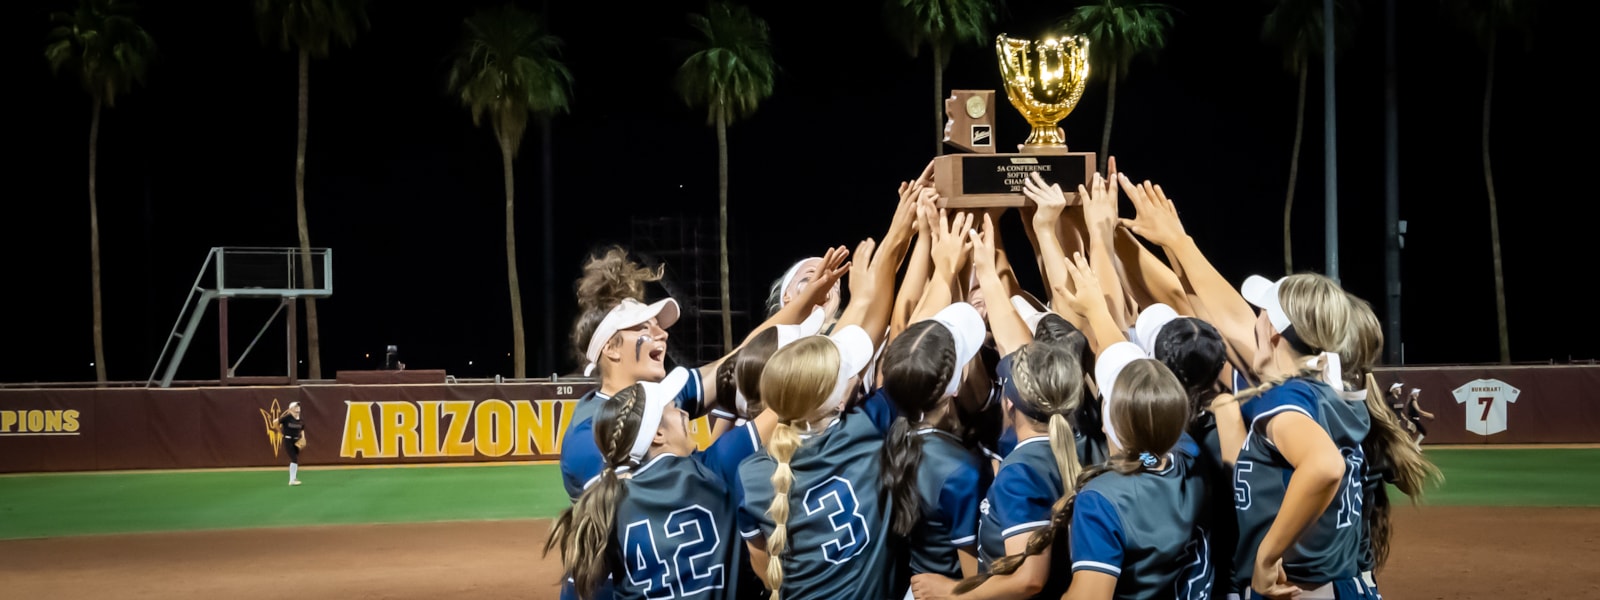 Willow Canyon softball team holds trophy